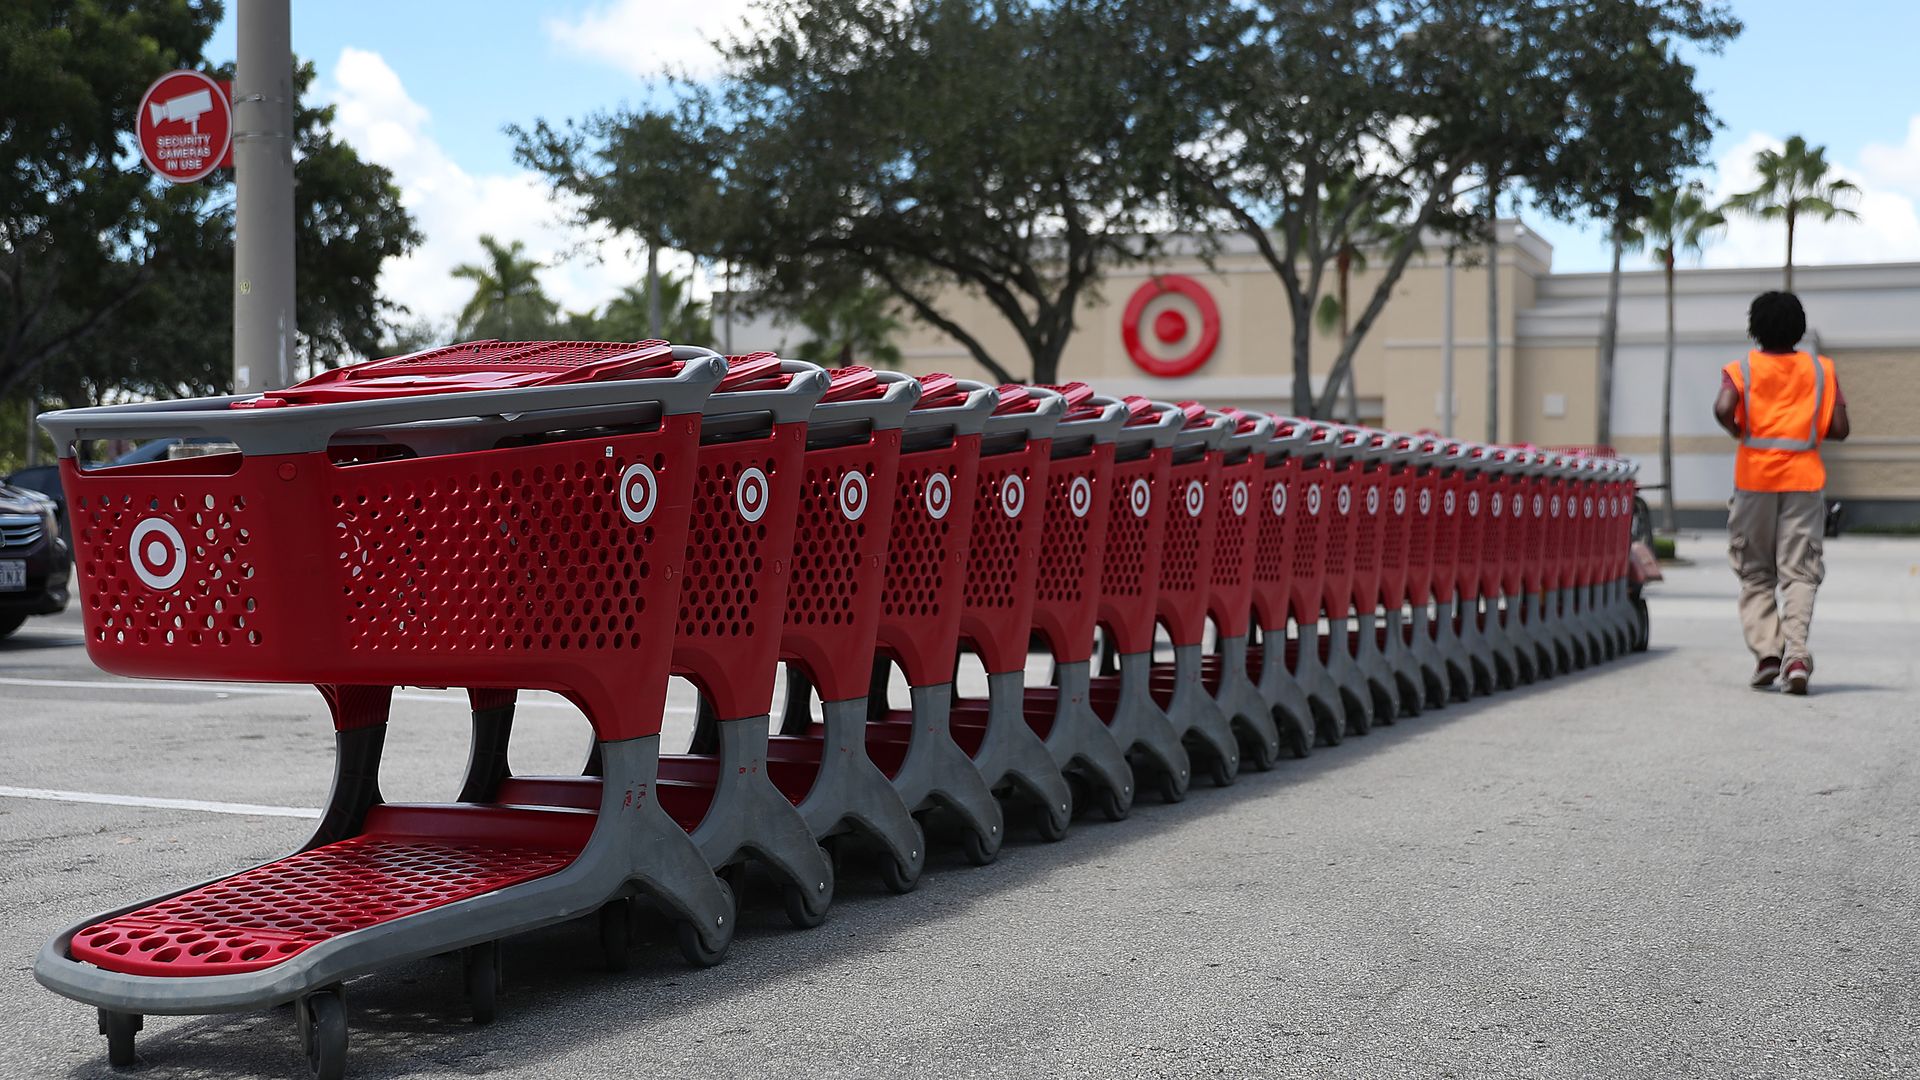 In this image, a Target employee in an orange vest stands next to a line of Target shopping carts.